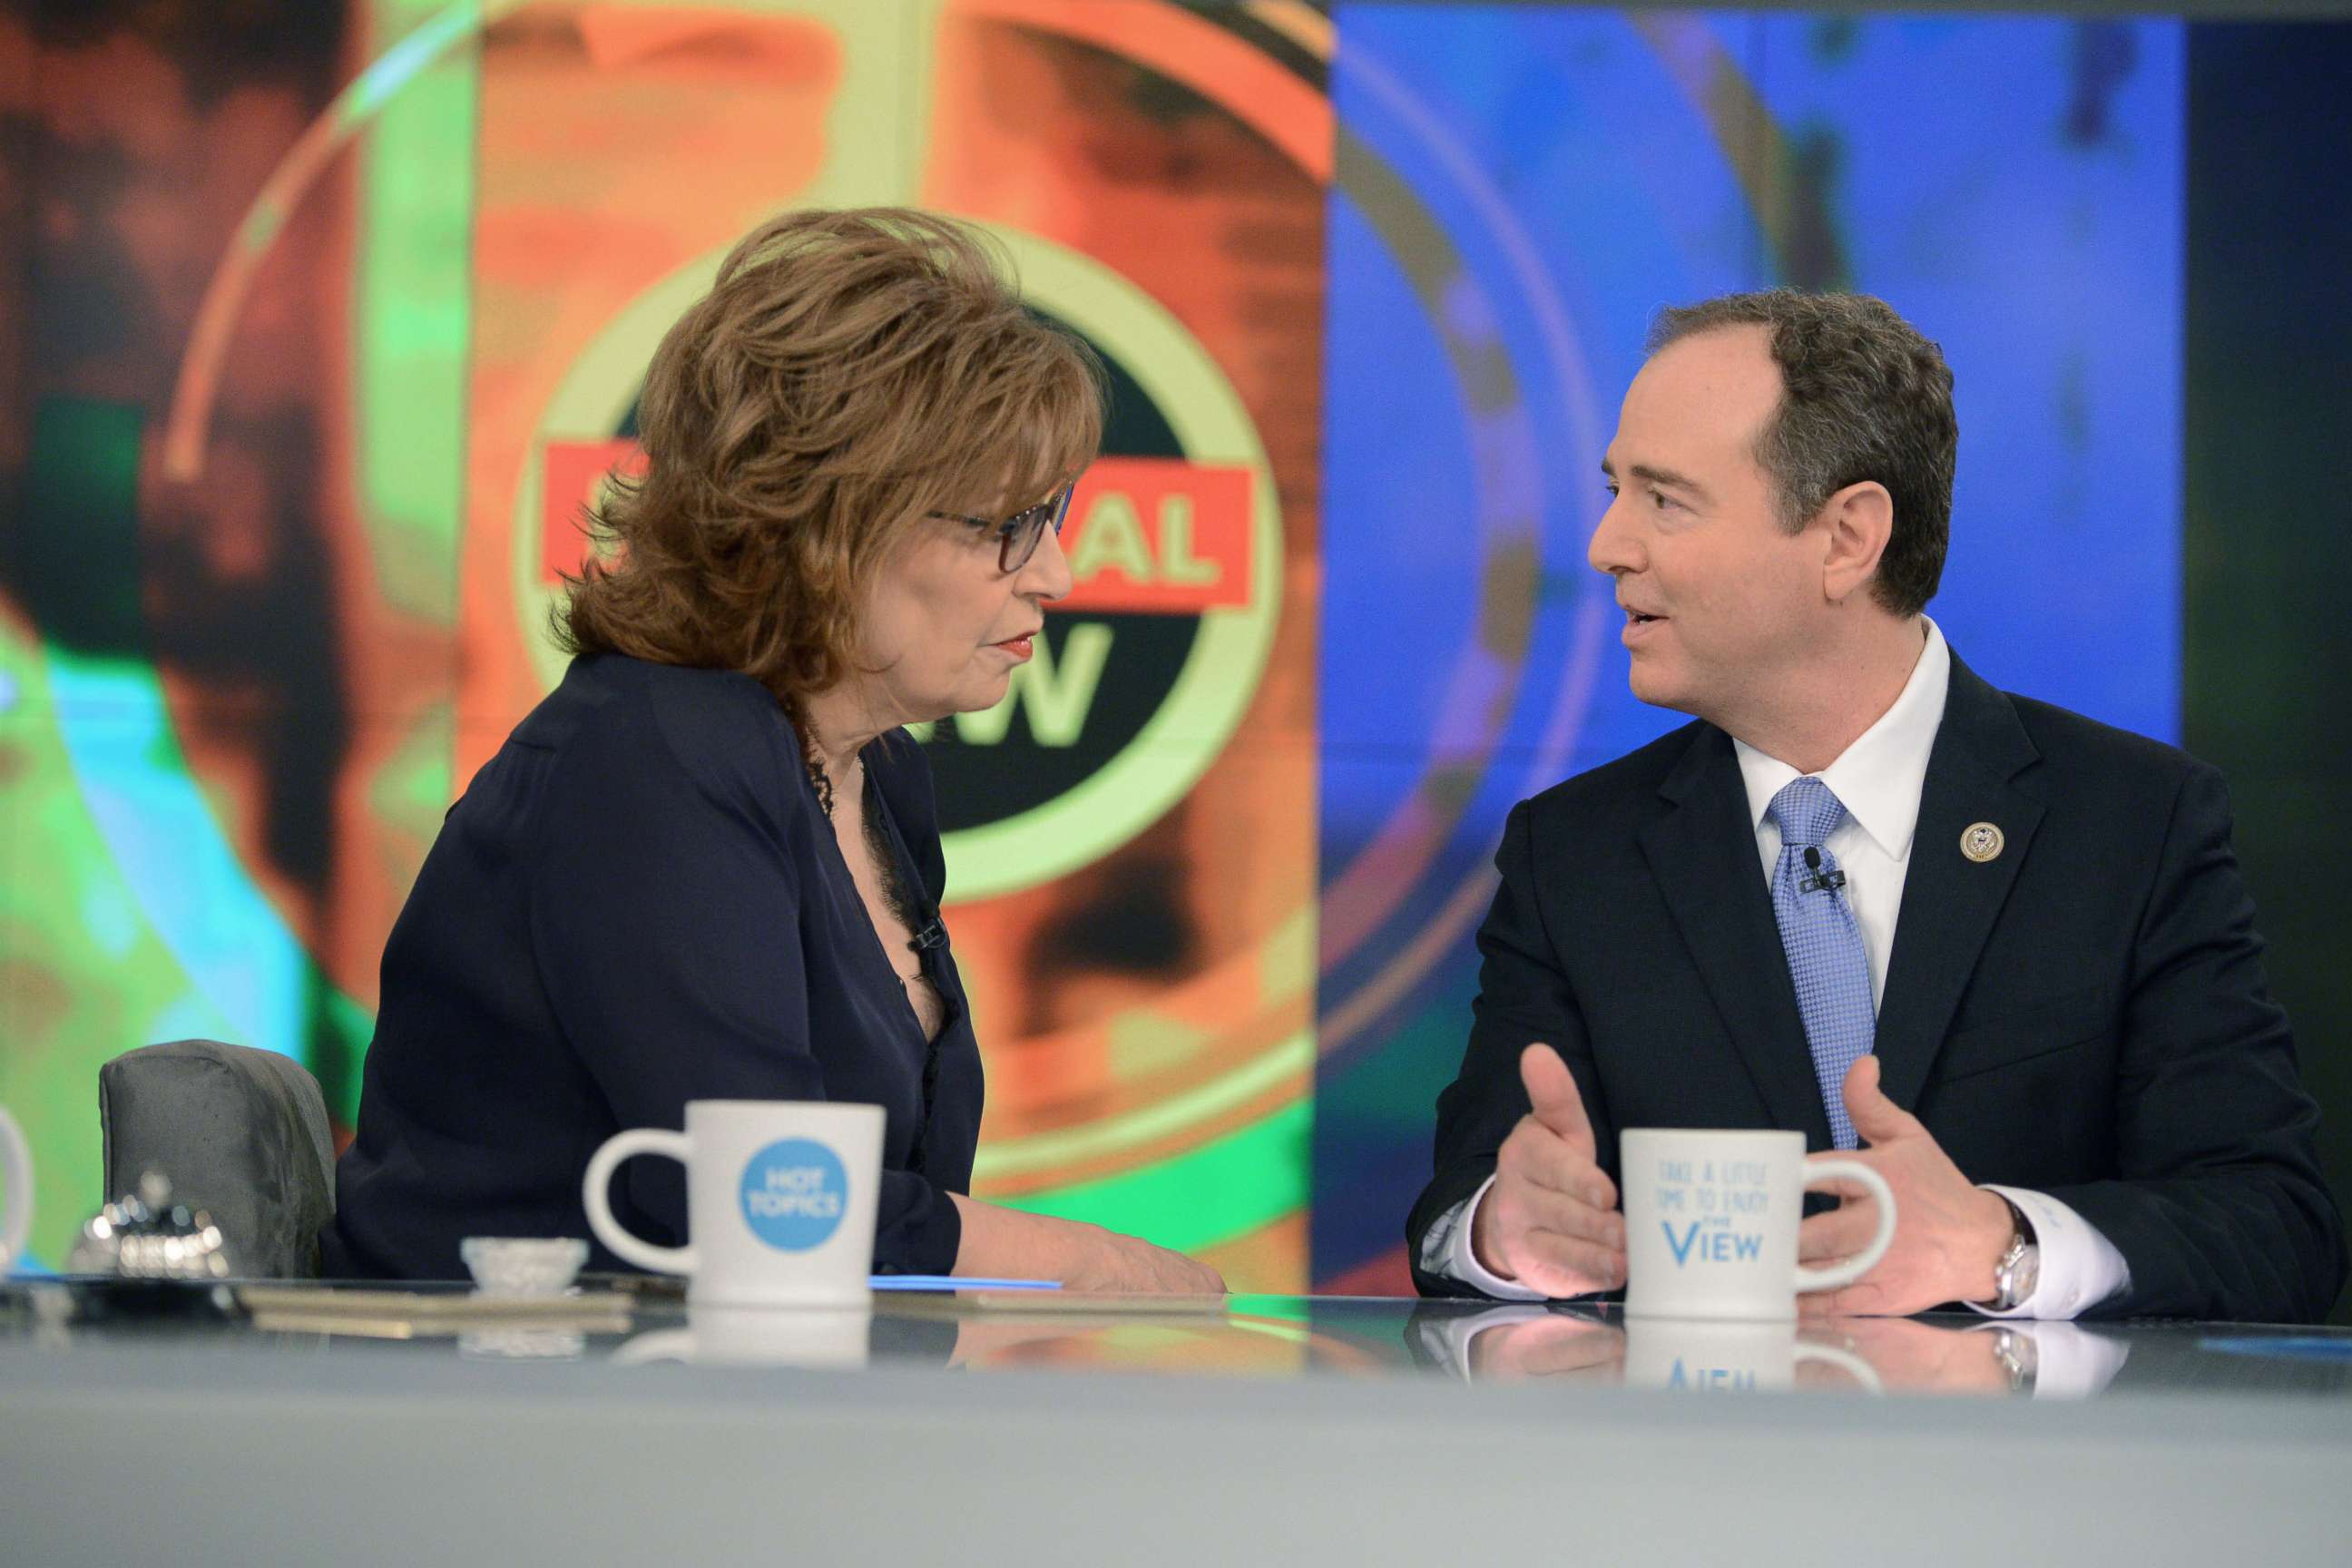 PHOTO: ABC's Joy Behar of the "The View" speaks to Representative Adam Schiff during his appearance on the show, March 1, 2018.